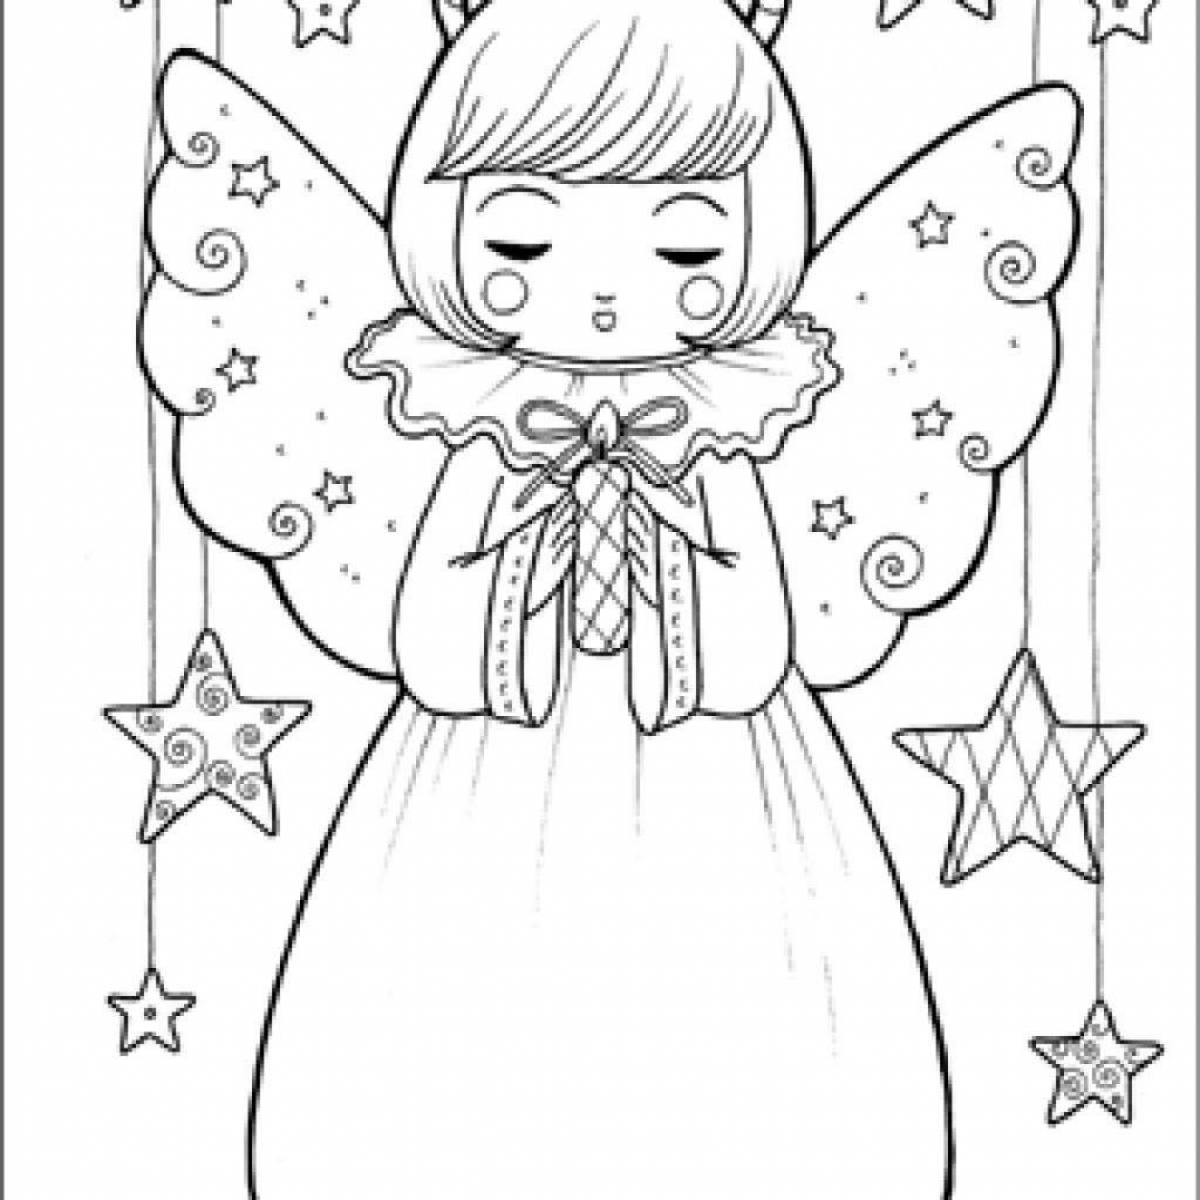 Sweet Christmas angel coloring page